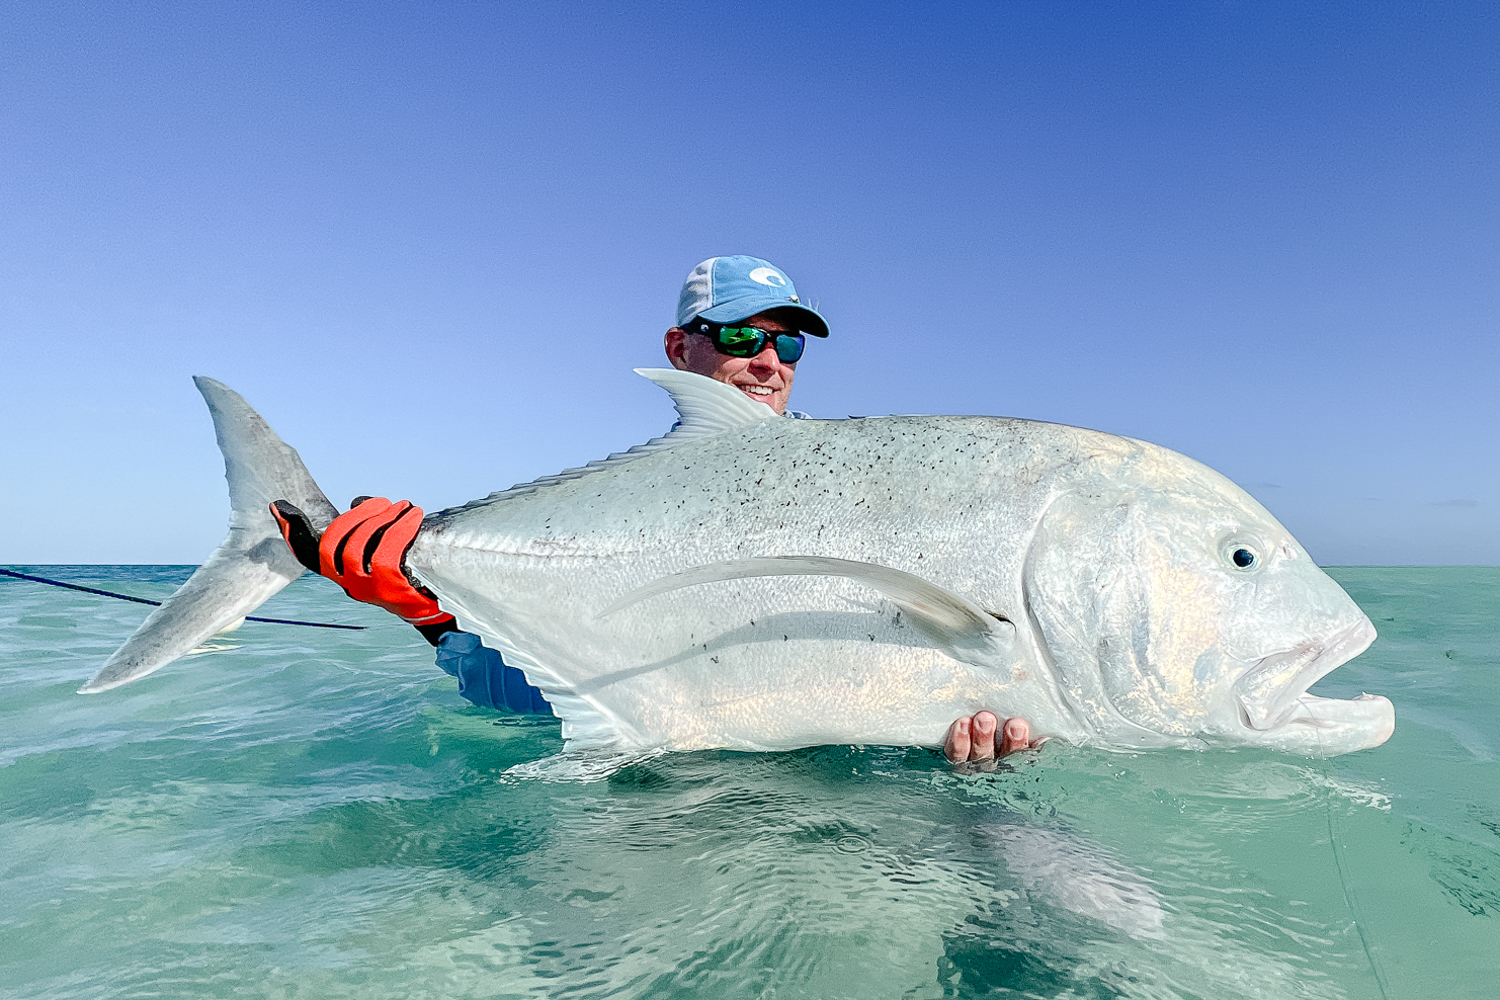 Fly Fishing Giant Trevally - The Catch, Facts, Flies, Rods & More